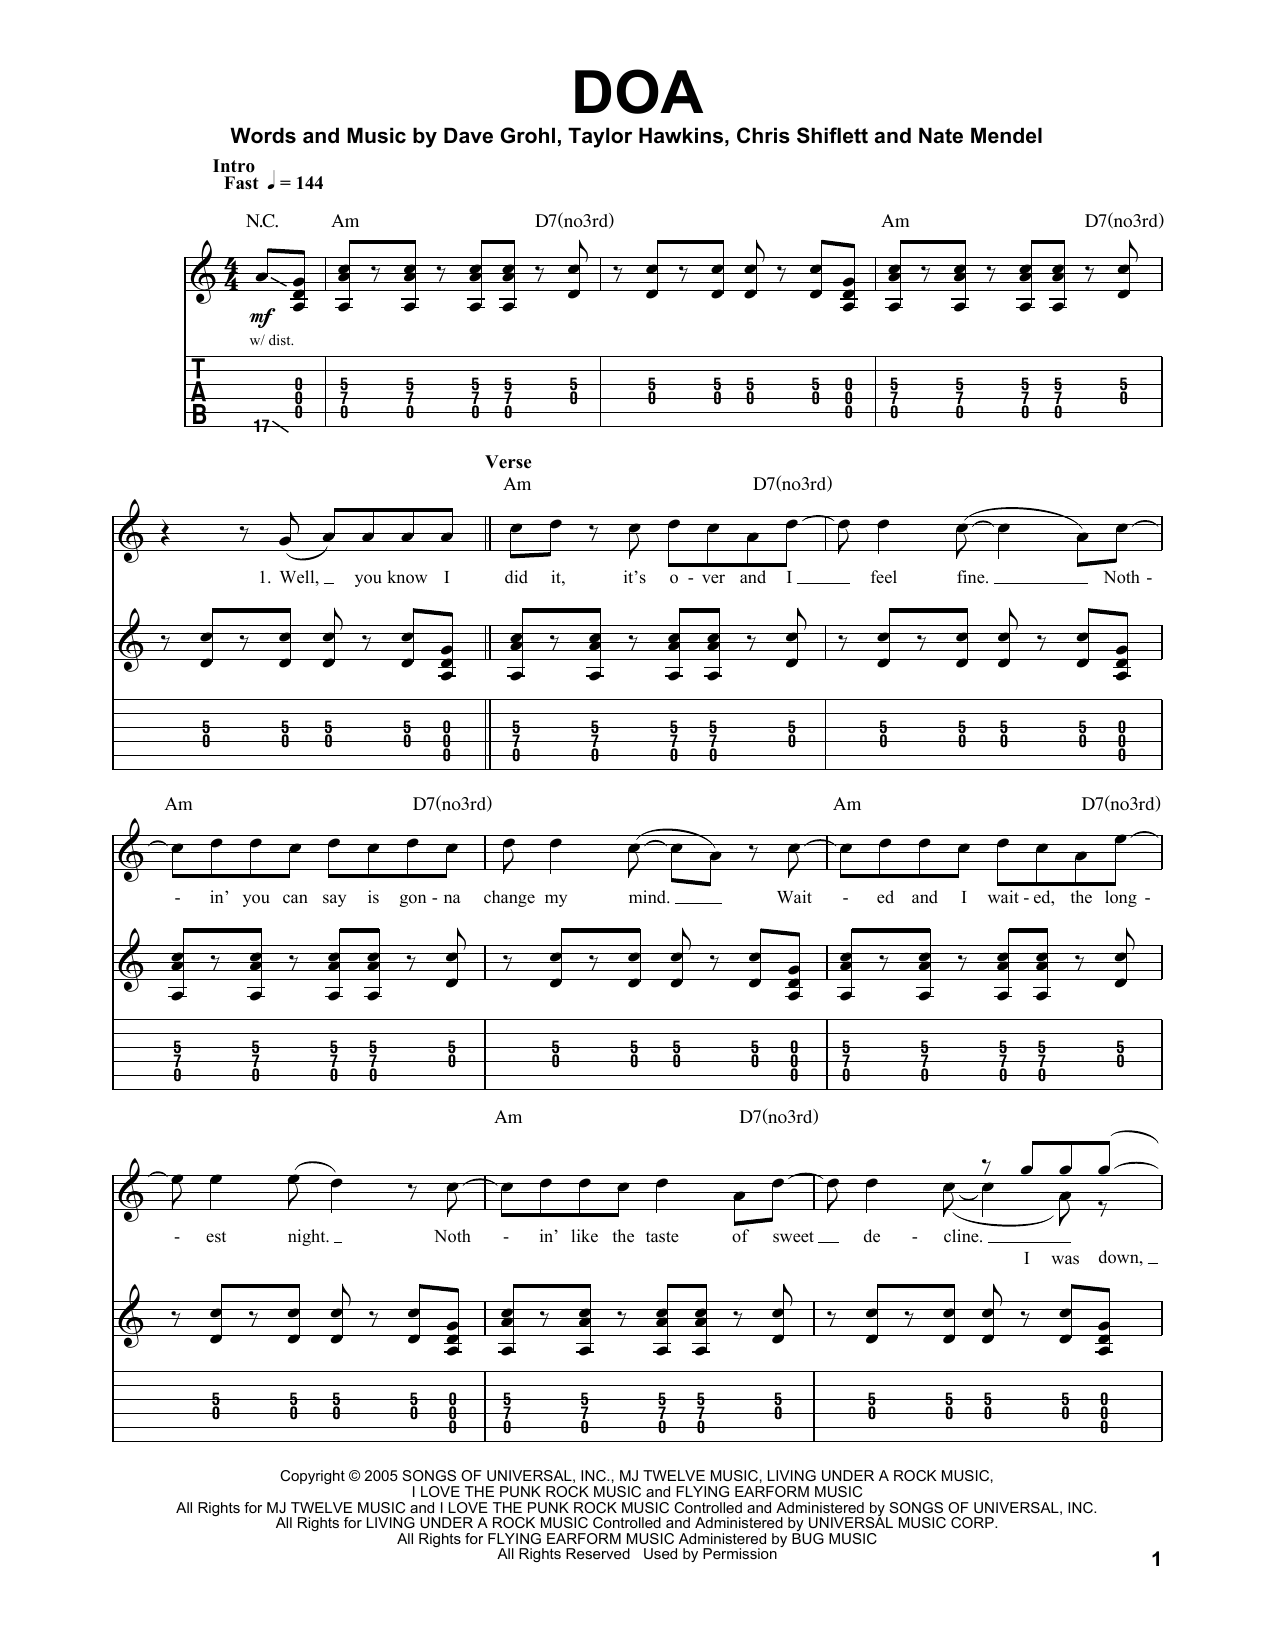 Download Foo Fighters DOA Sheet Music